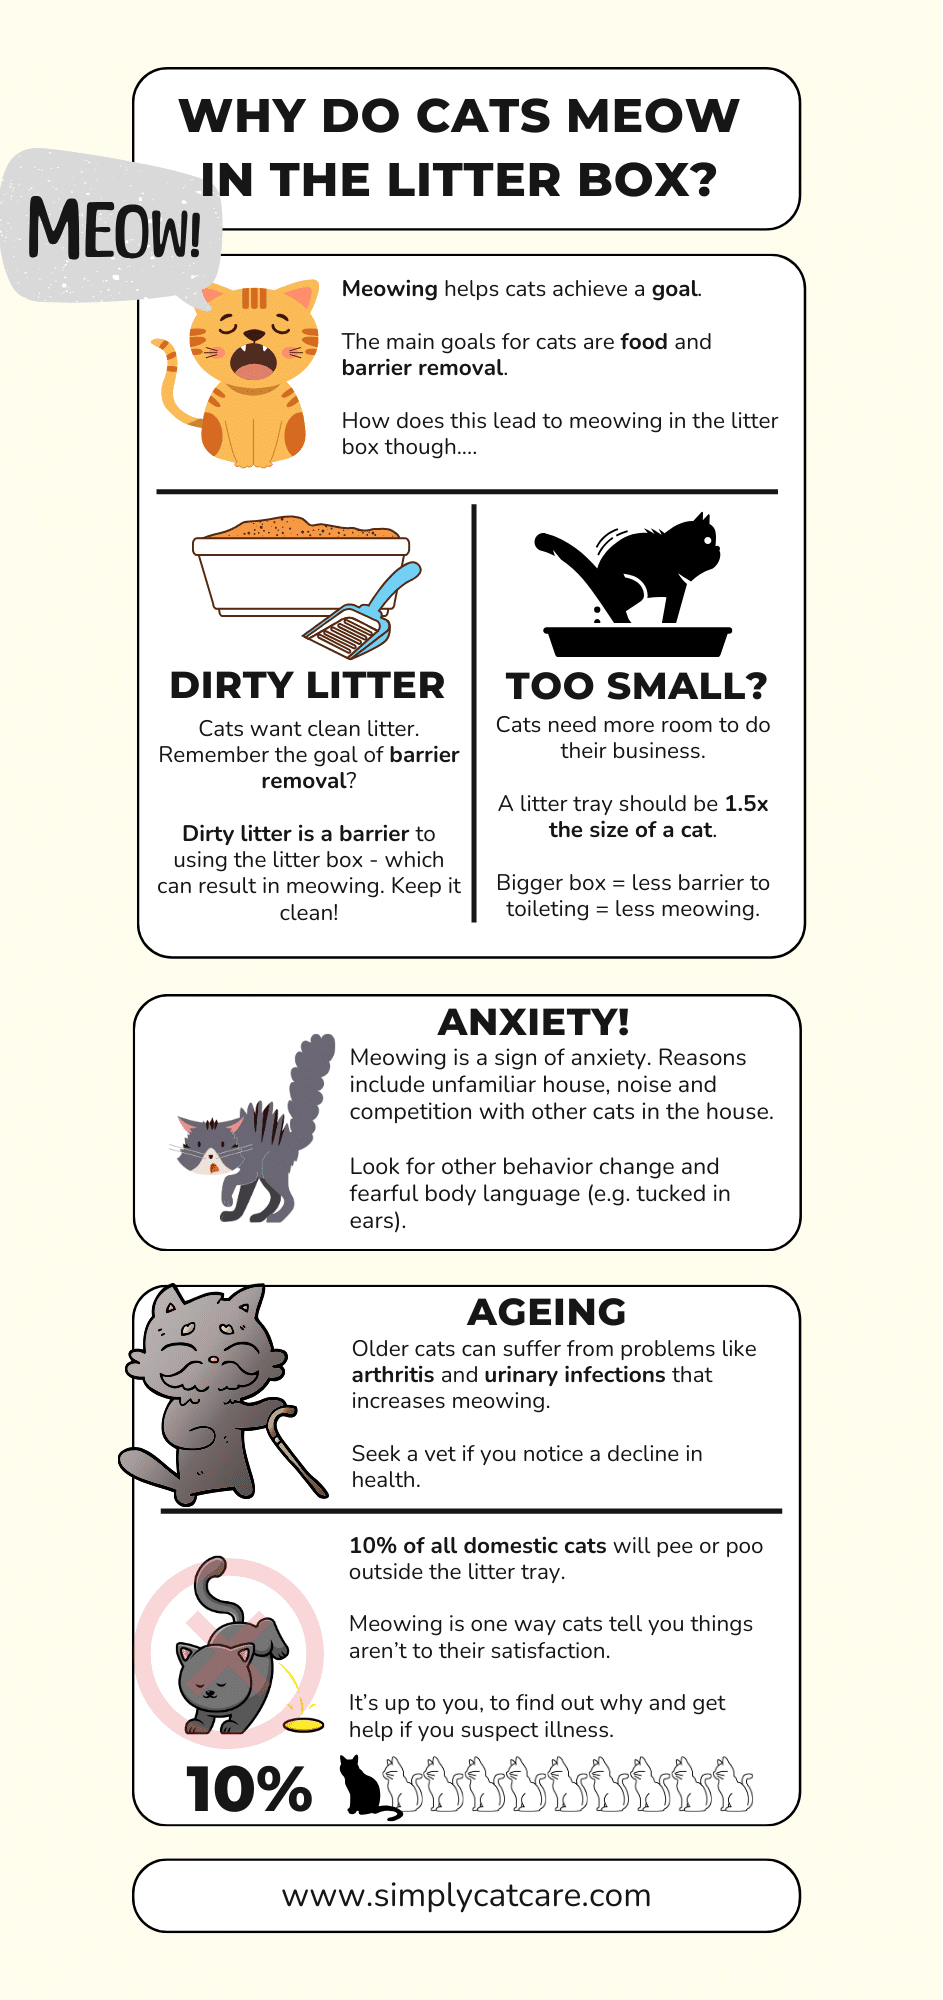 An infographic on "Why Does My Cat Meow in The Litter Box?"